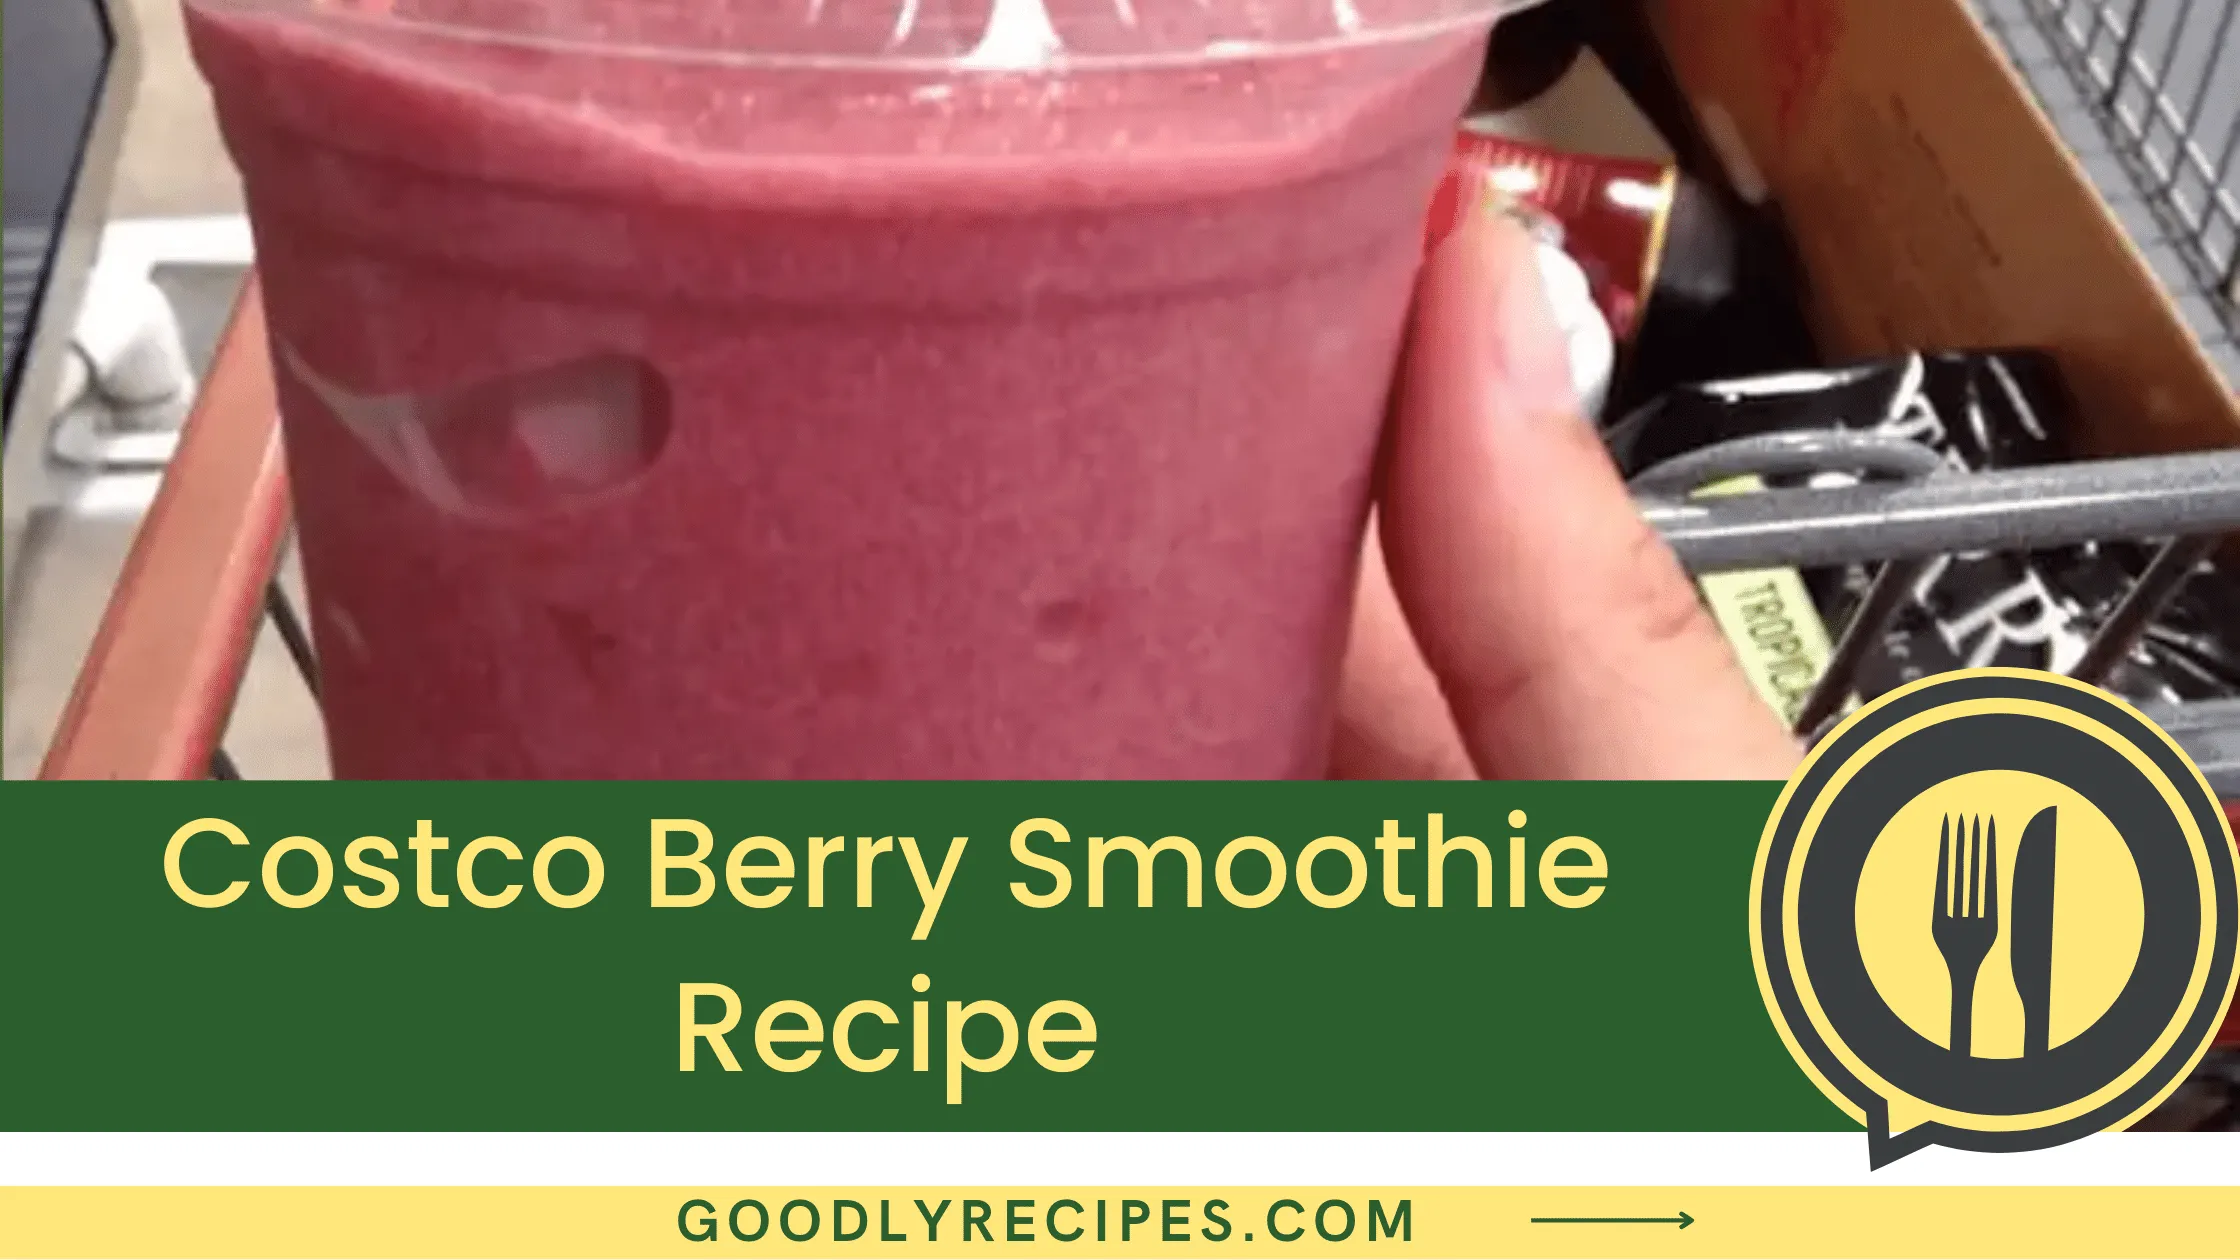 What is Costco Berry Smoothie?